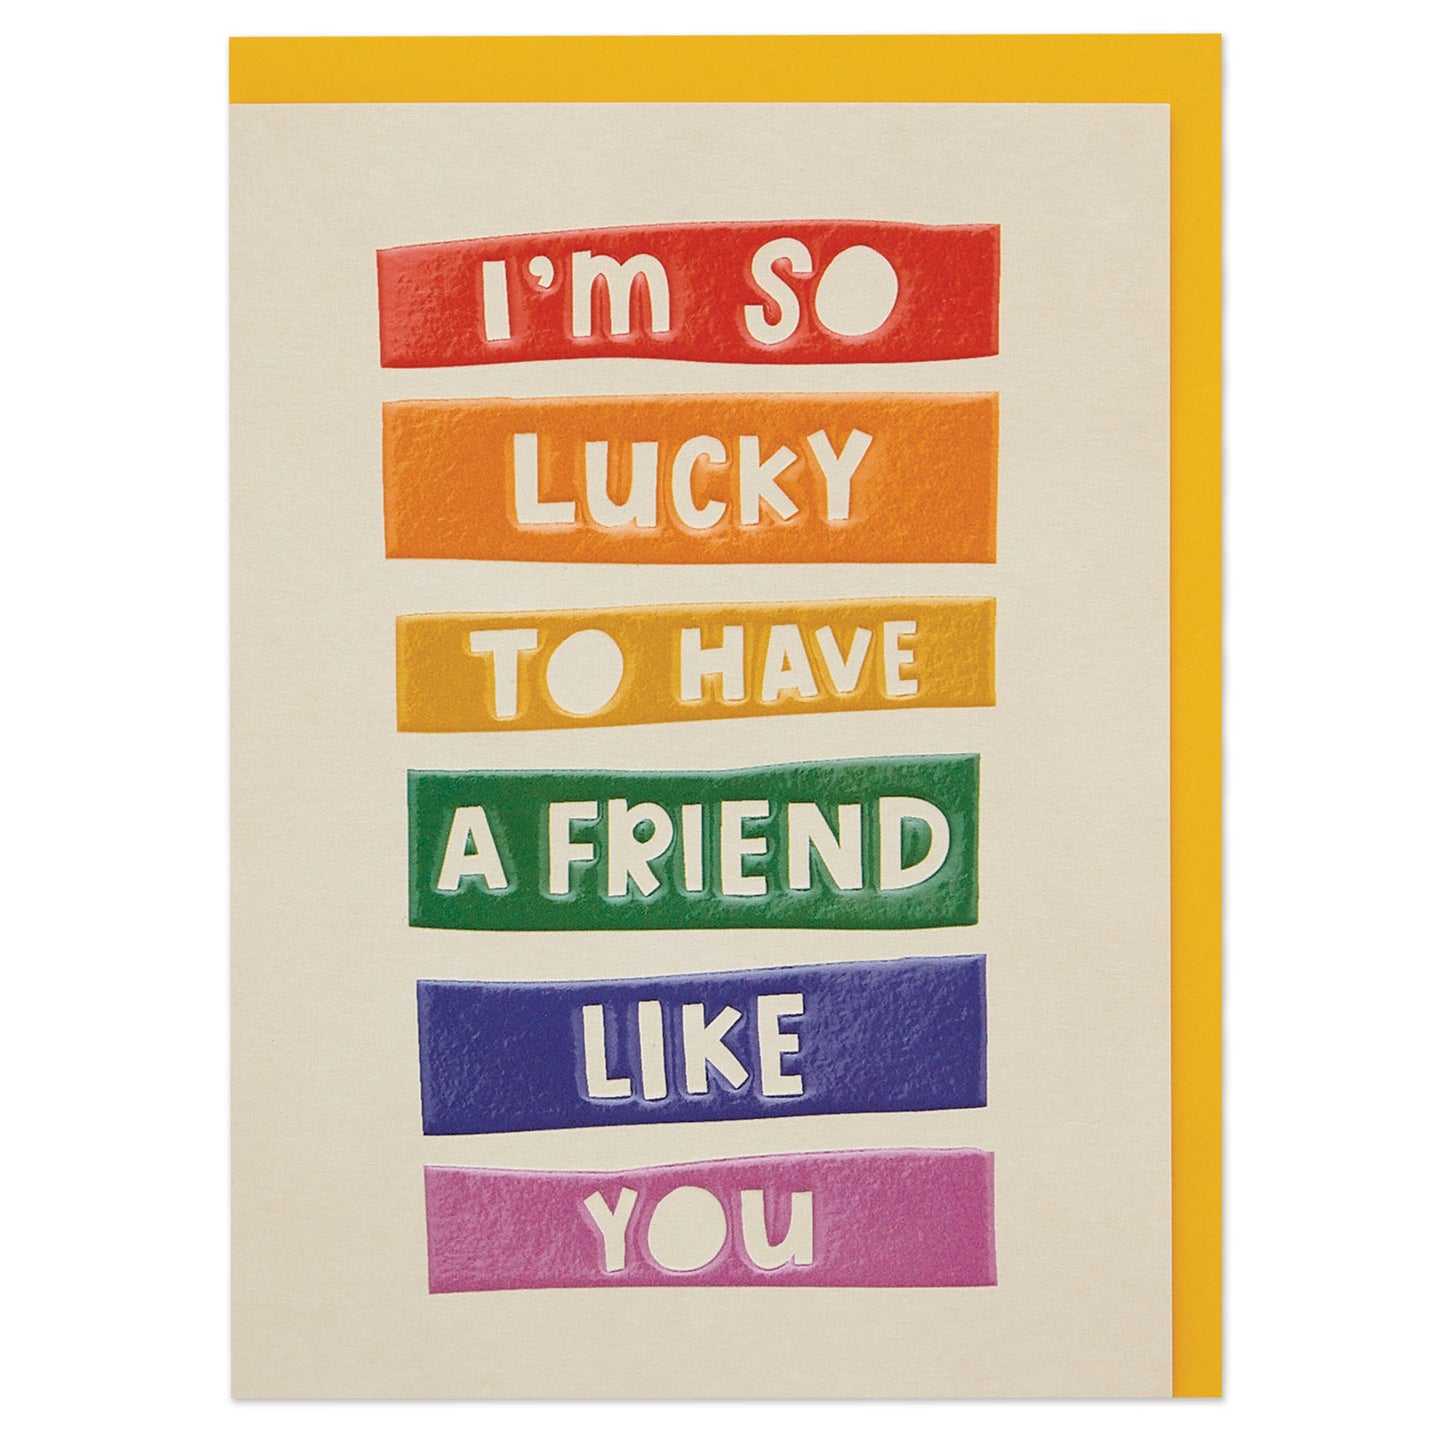 'So lucky to have a friend like you', Say What SAY05